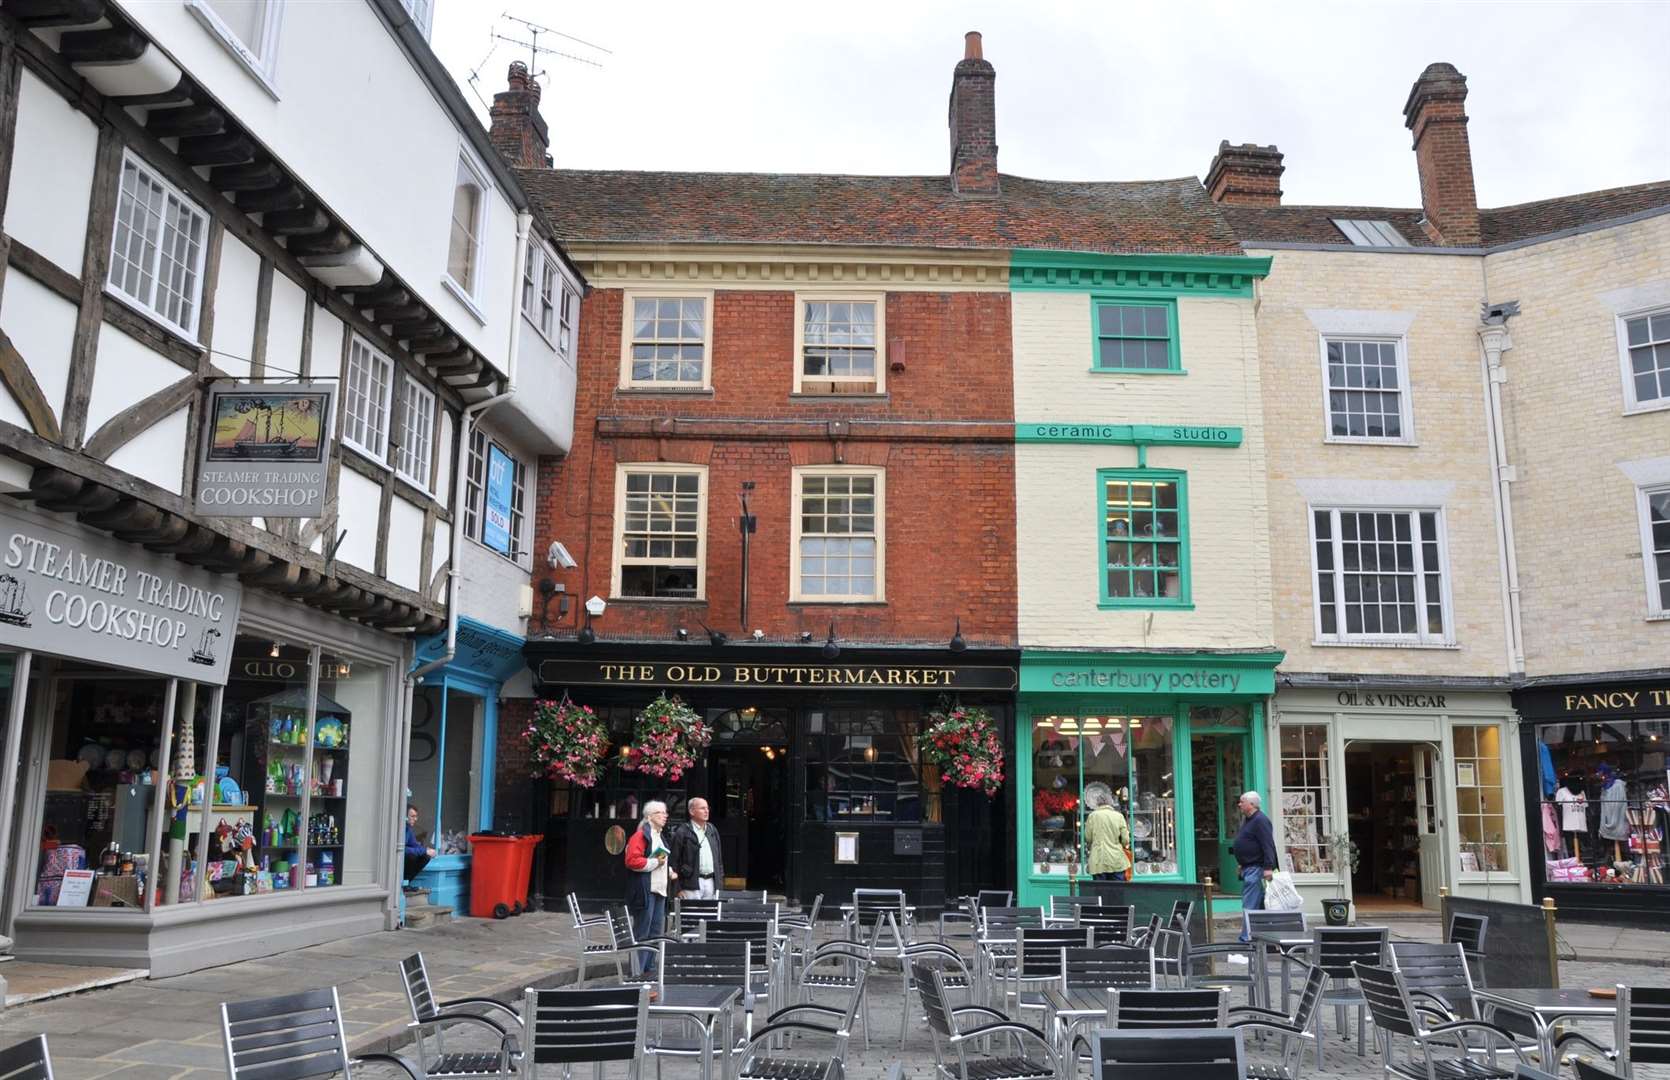 The Buttermarket in Canterbury will be used for filming the new thriller series